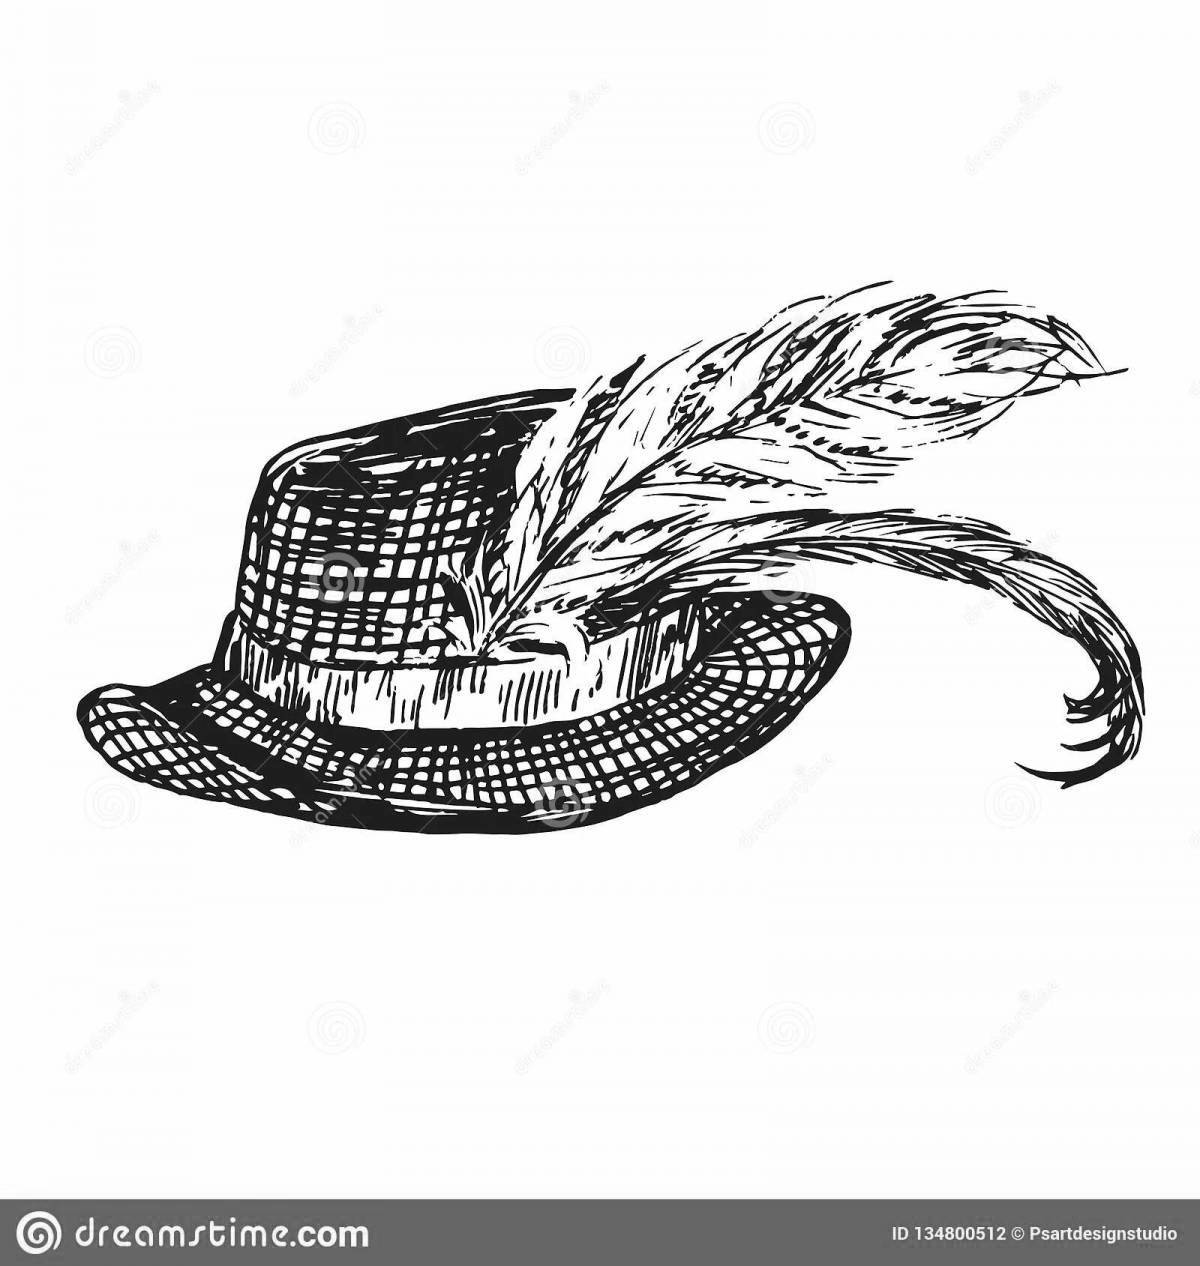 Exquisite cat in the hat with boots